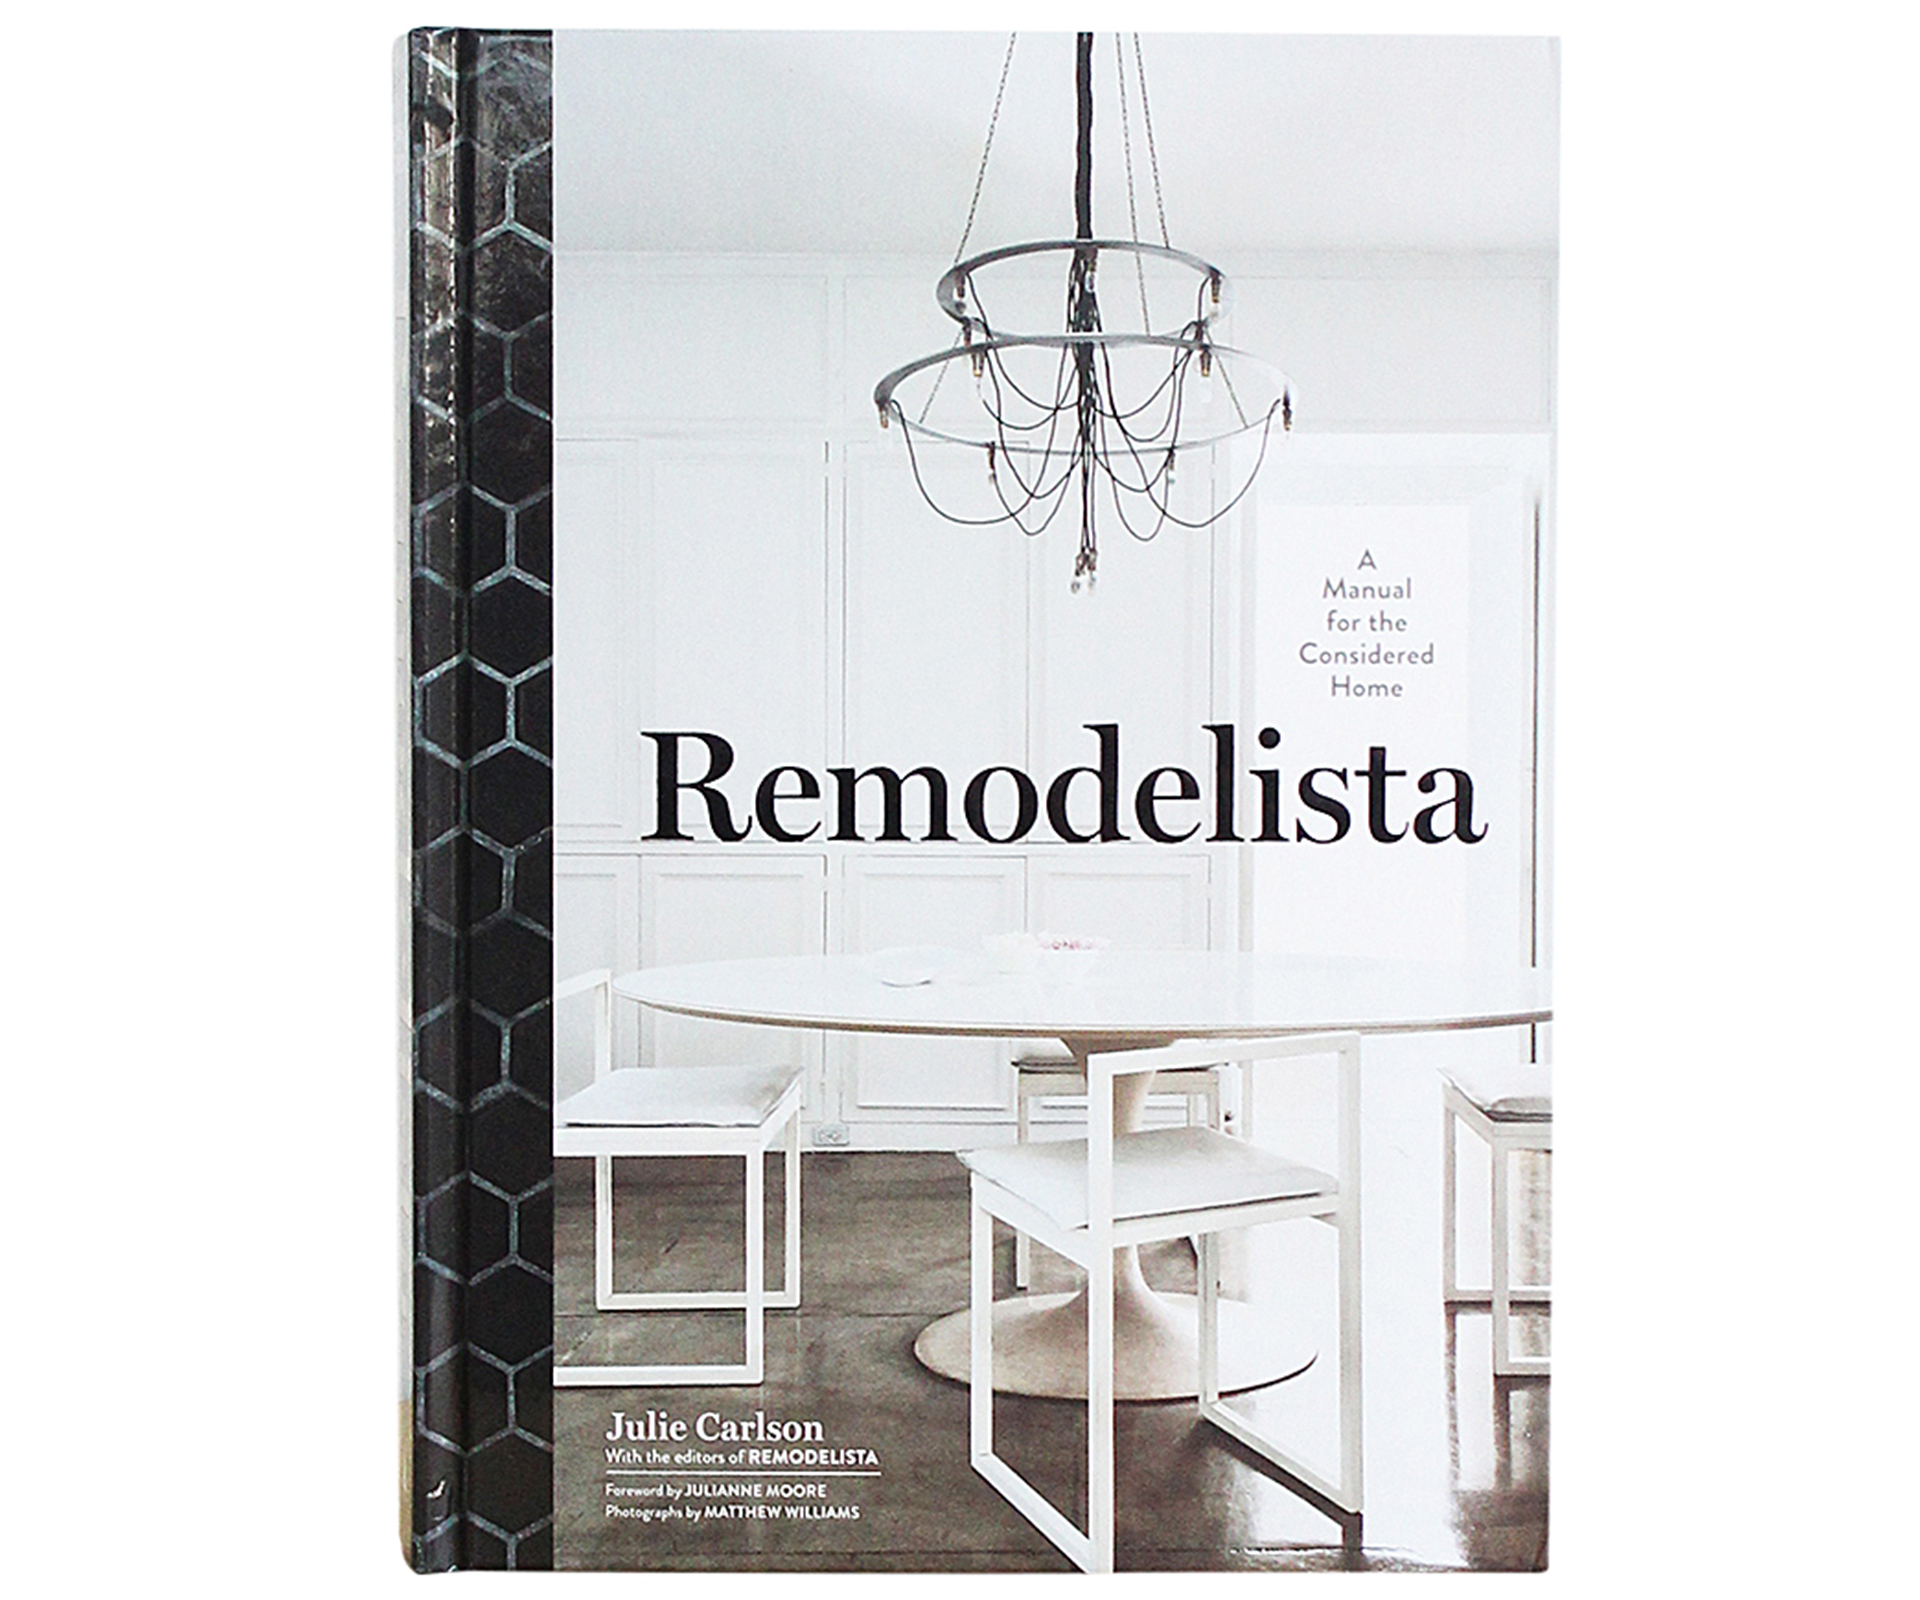 8 inspiring coffee table books you need for your home